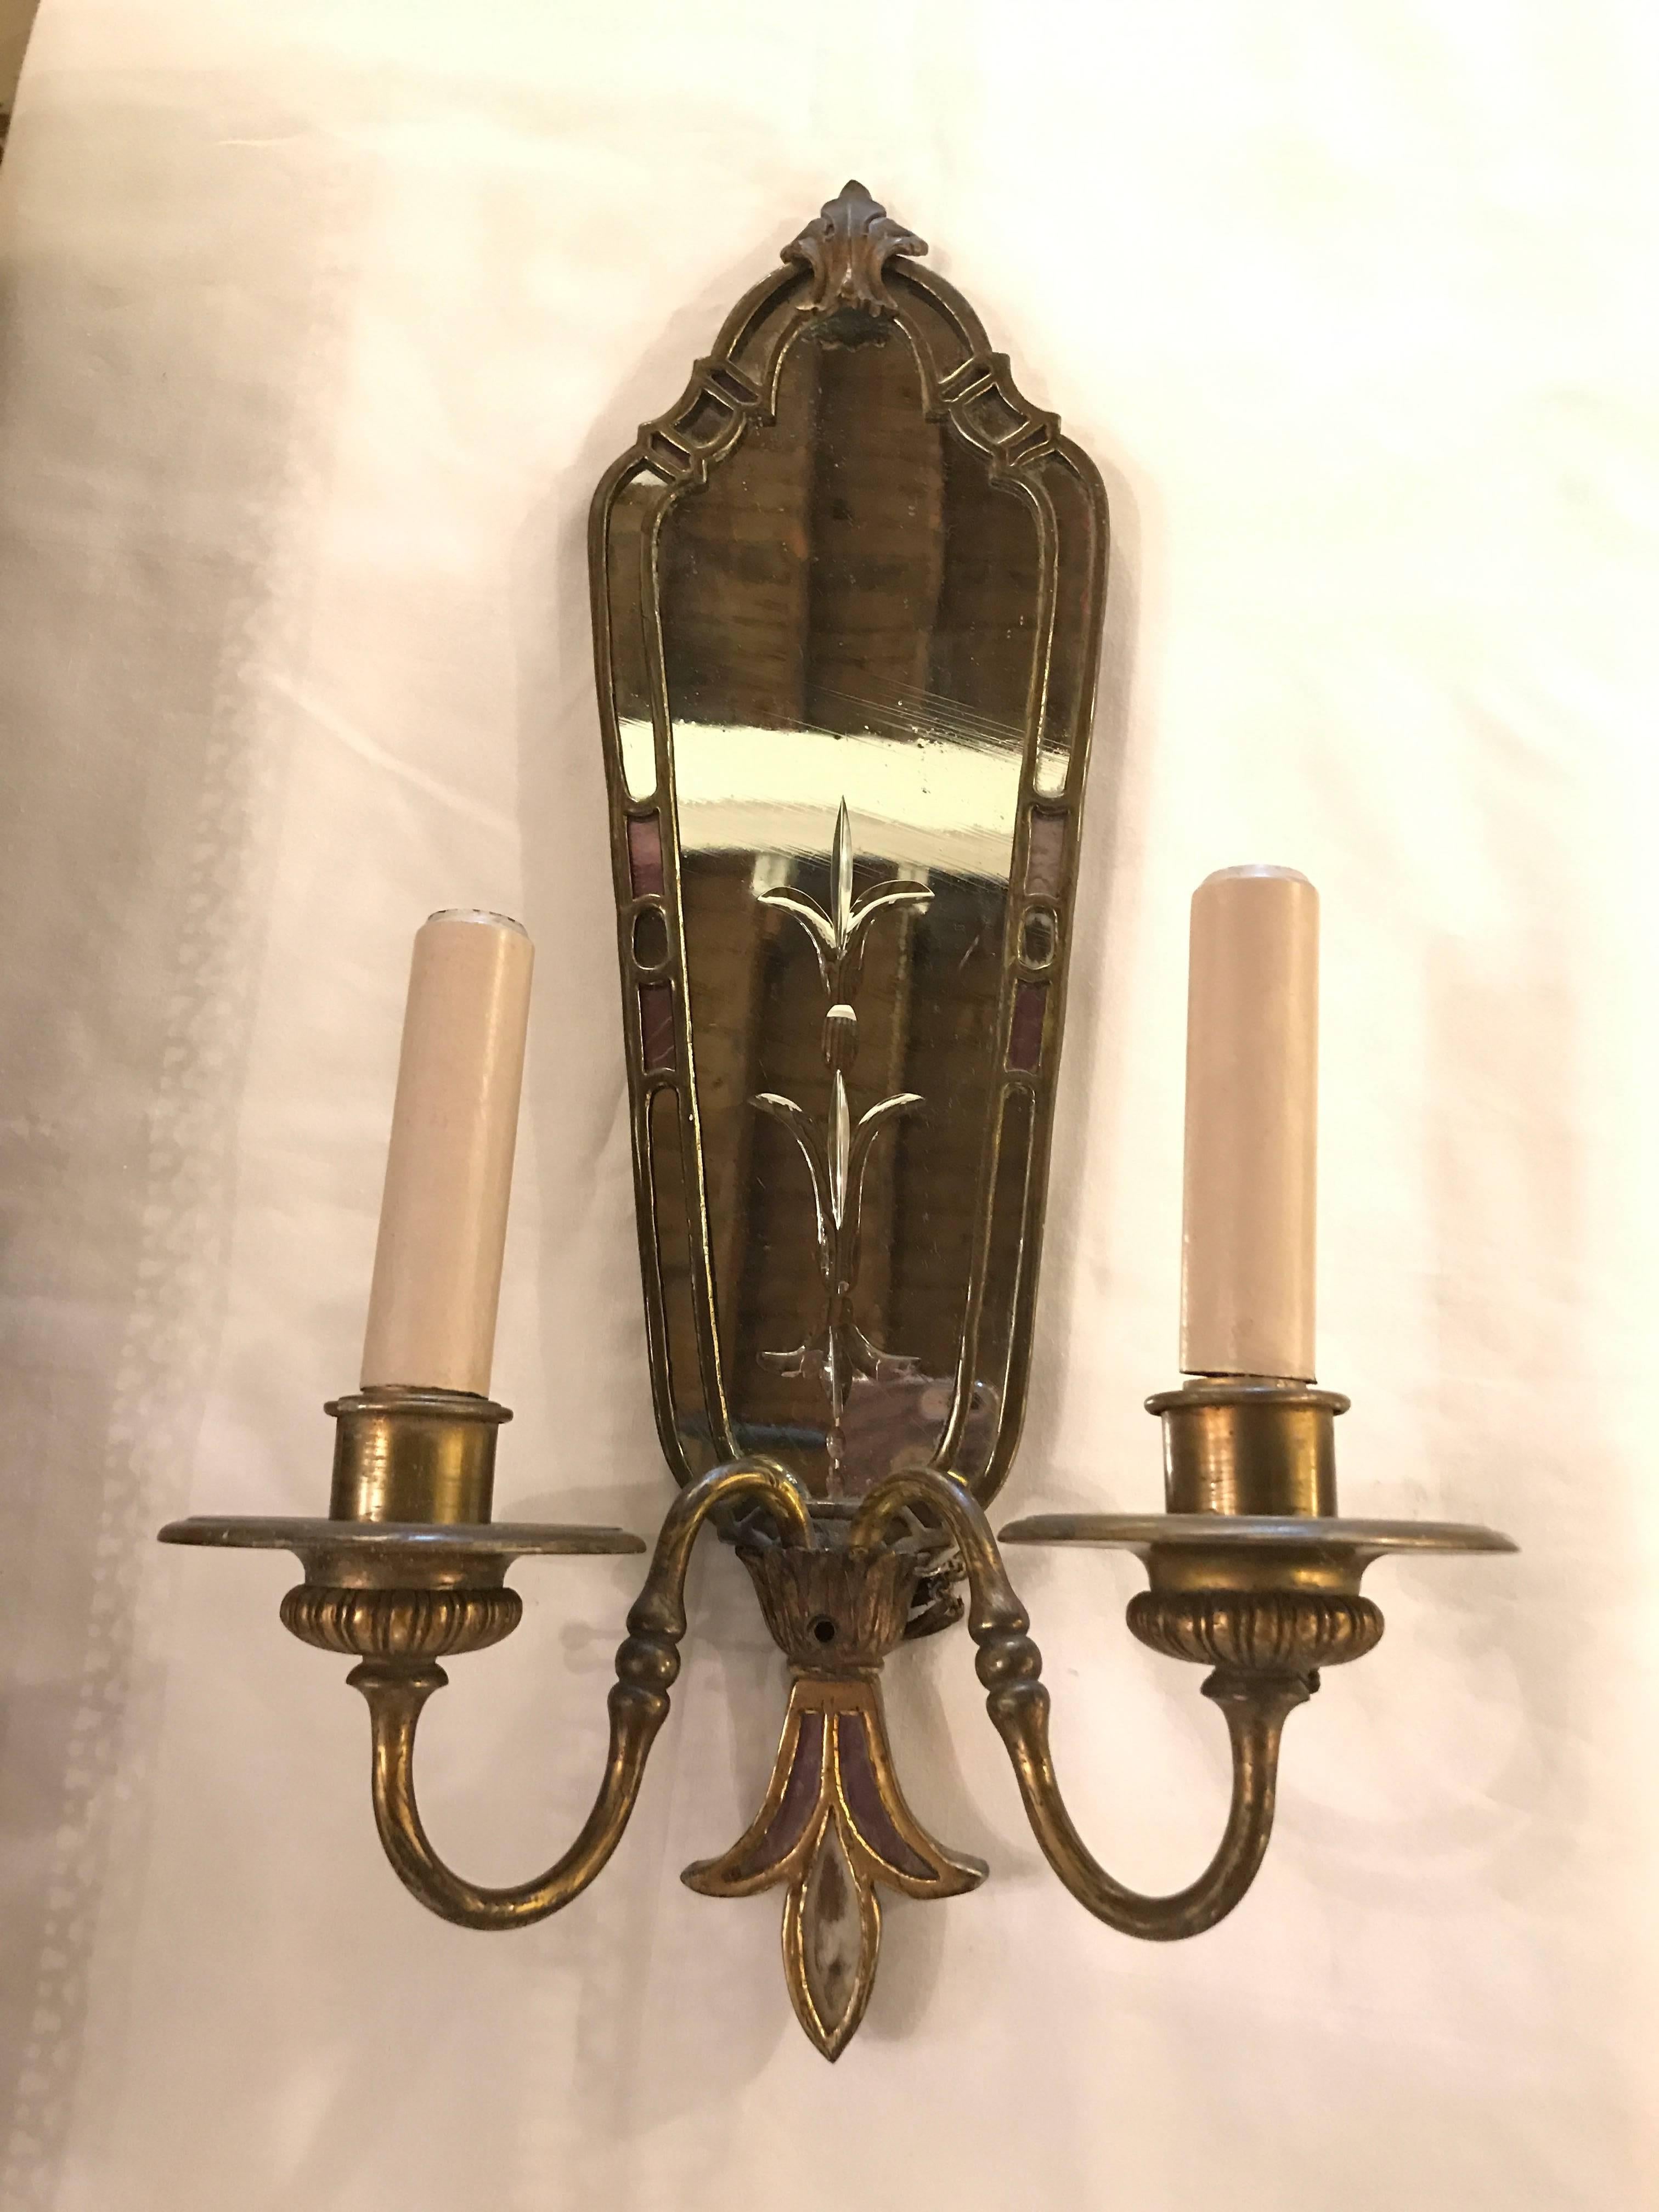 A pair of two-arm bronze antique mirrored back sconces each having an etched glass design of Fleur-de-lis. Very sleek and fine.